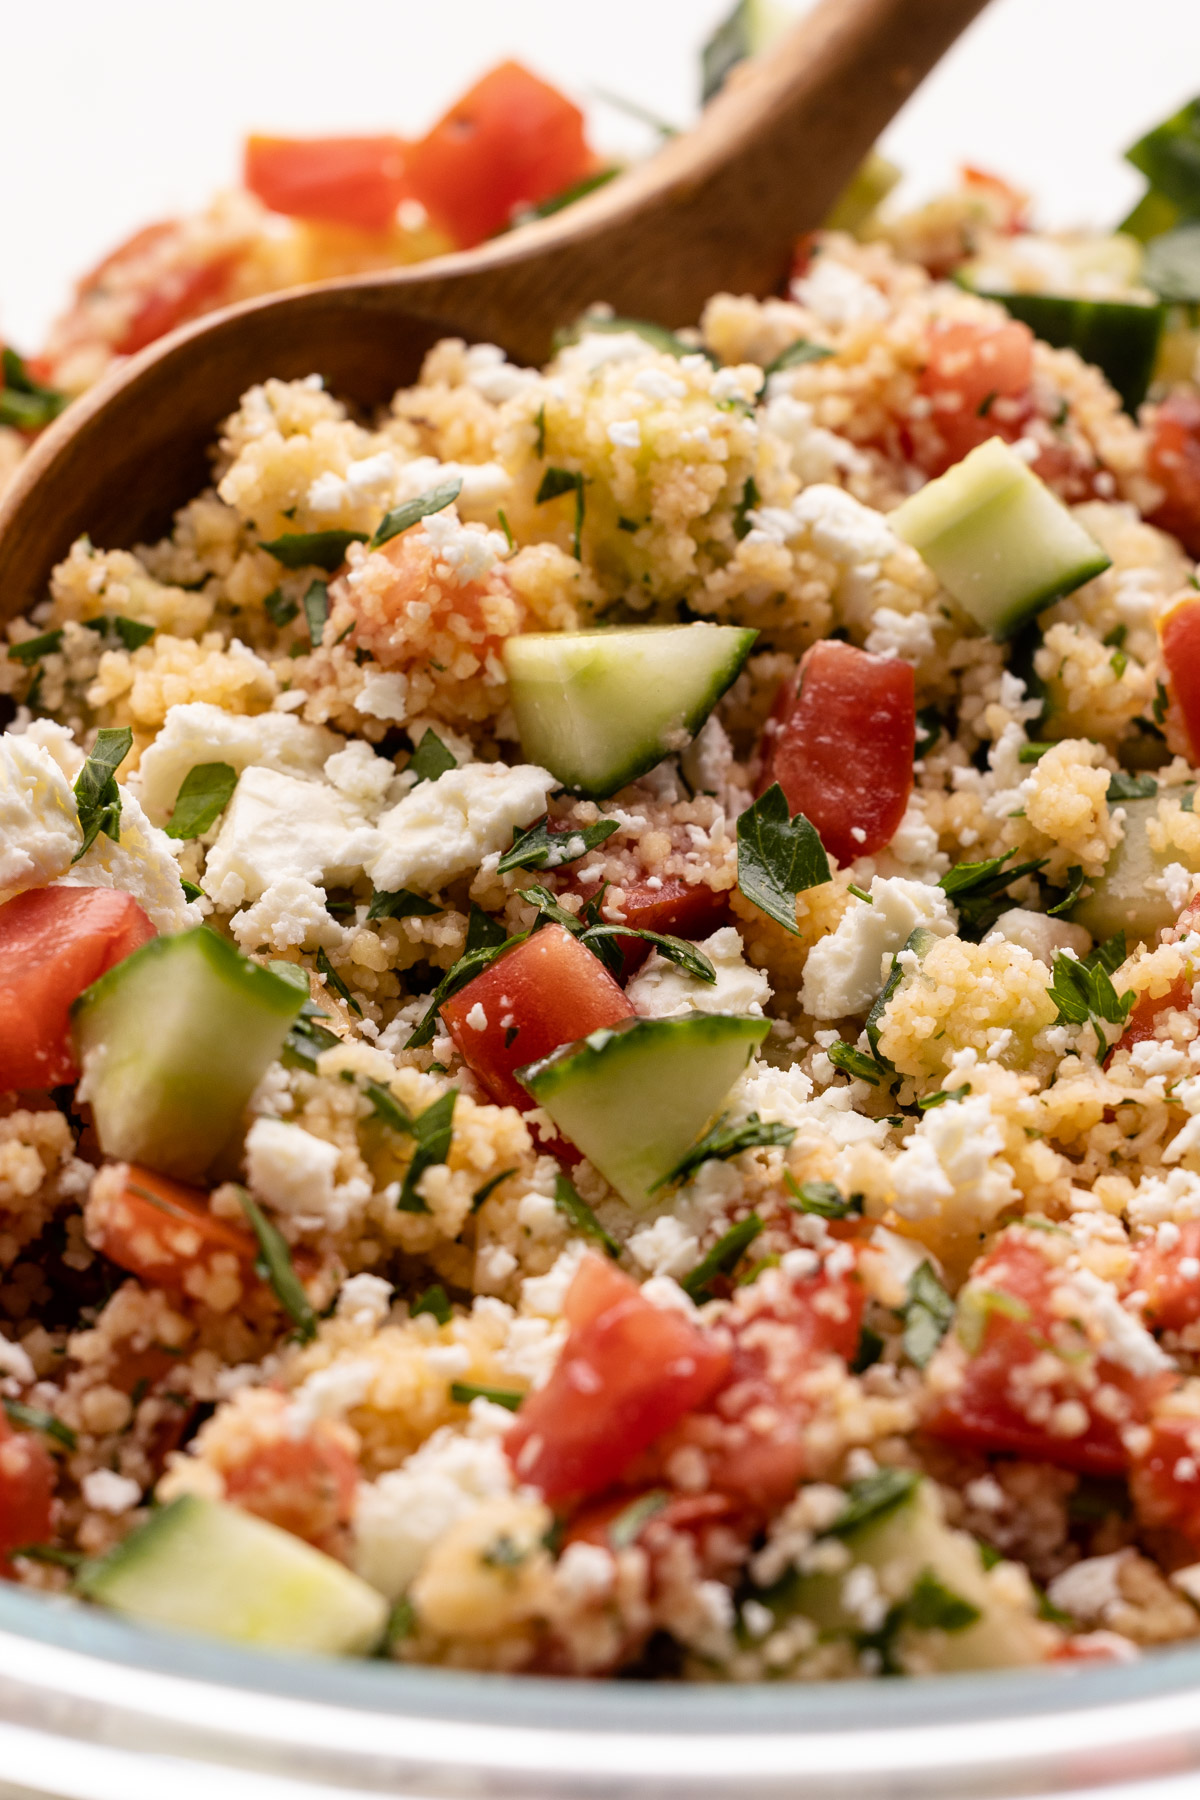 Couscous salad with tomatoes and feta.